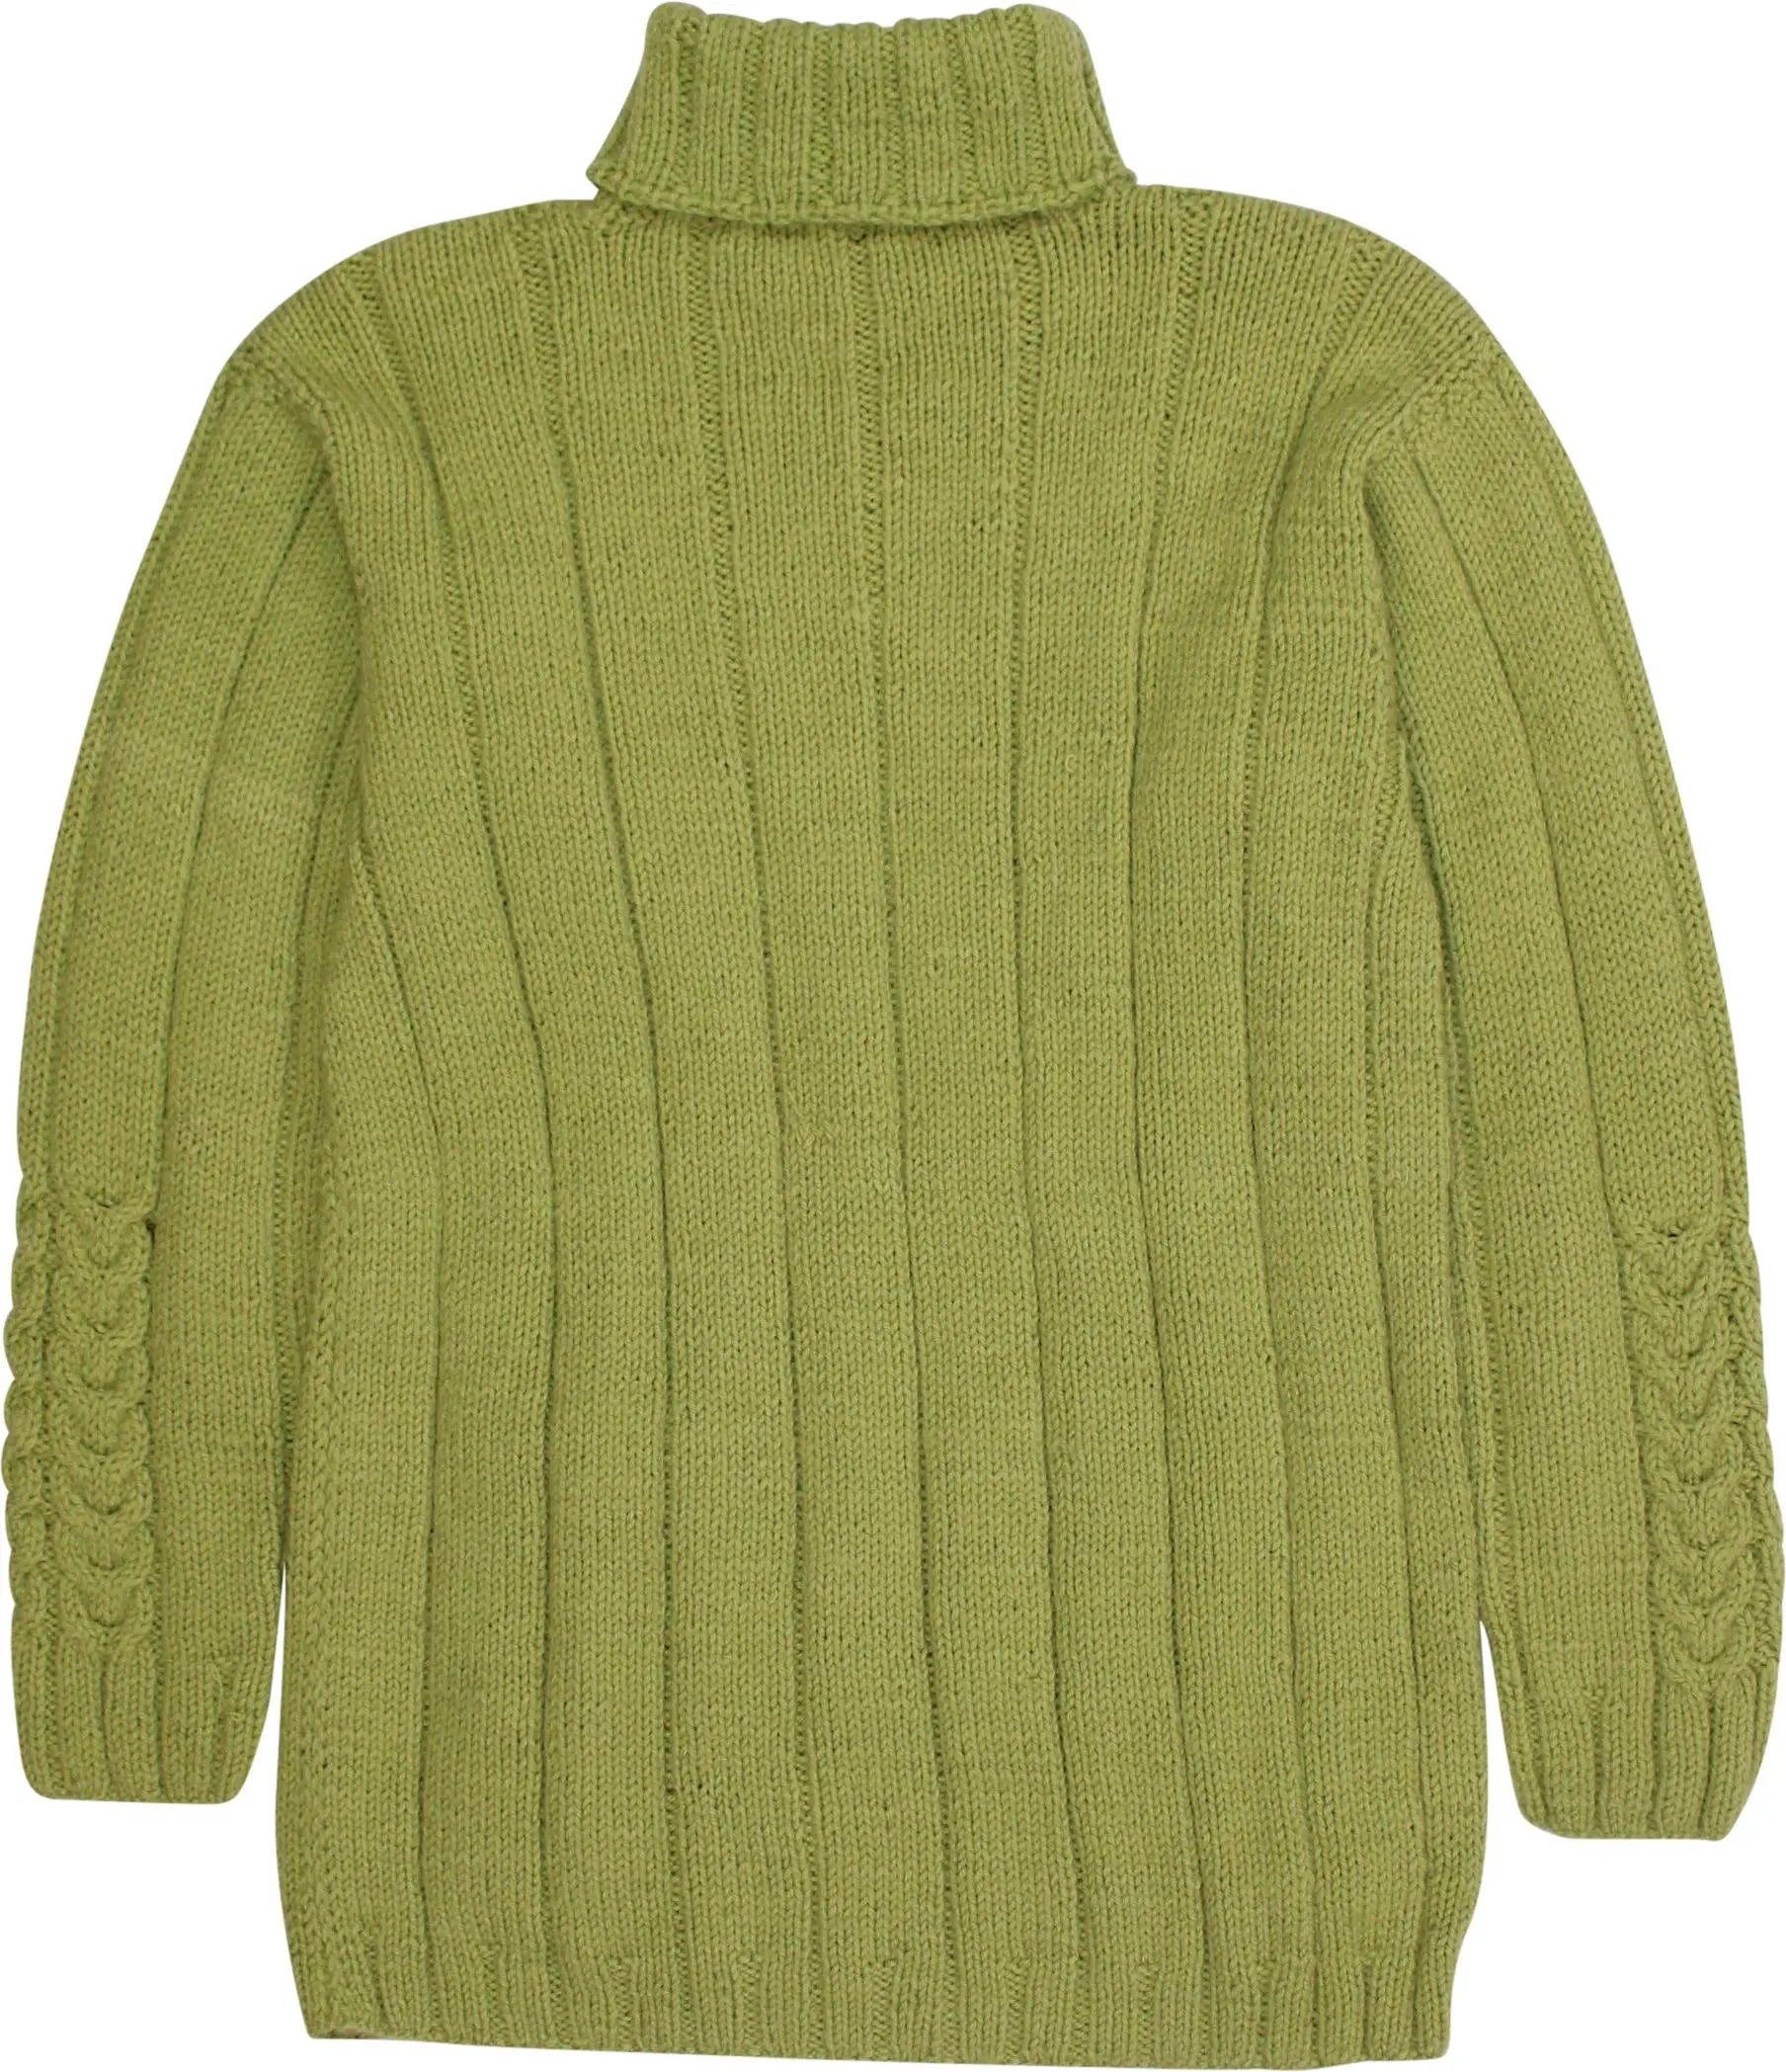 Handmade - Green Knitted Turtleneck Jumper- ThriftTale.com - Vintage and second handclothing